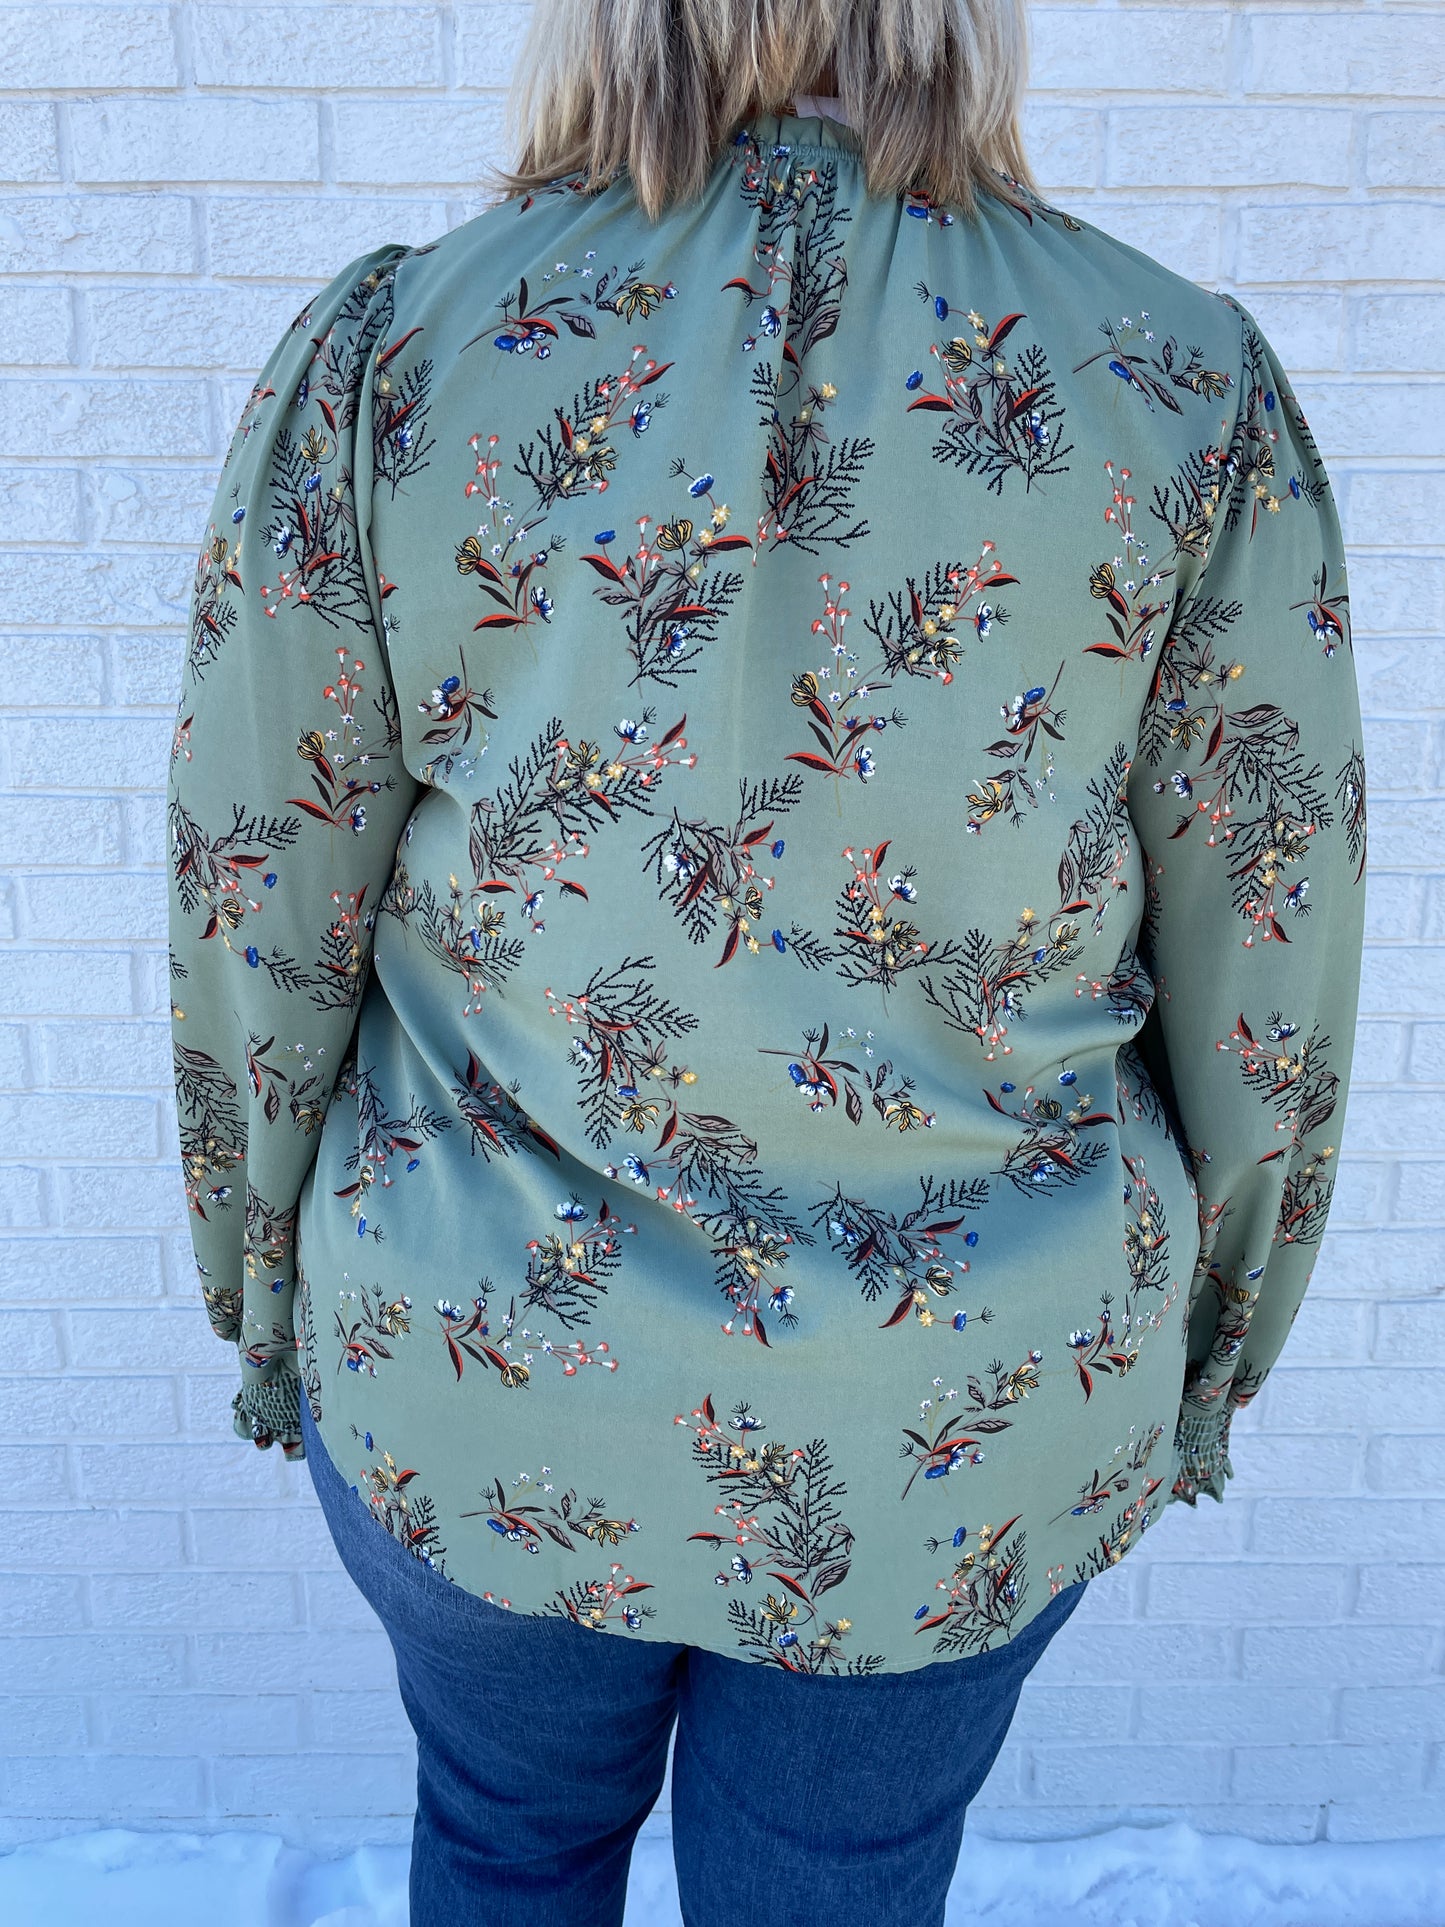 HAILEY & CO SMOCKED FLORAL TOP - SAGE